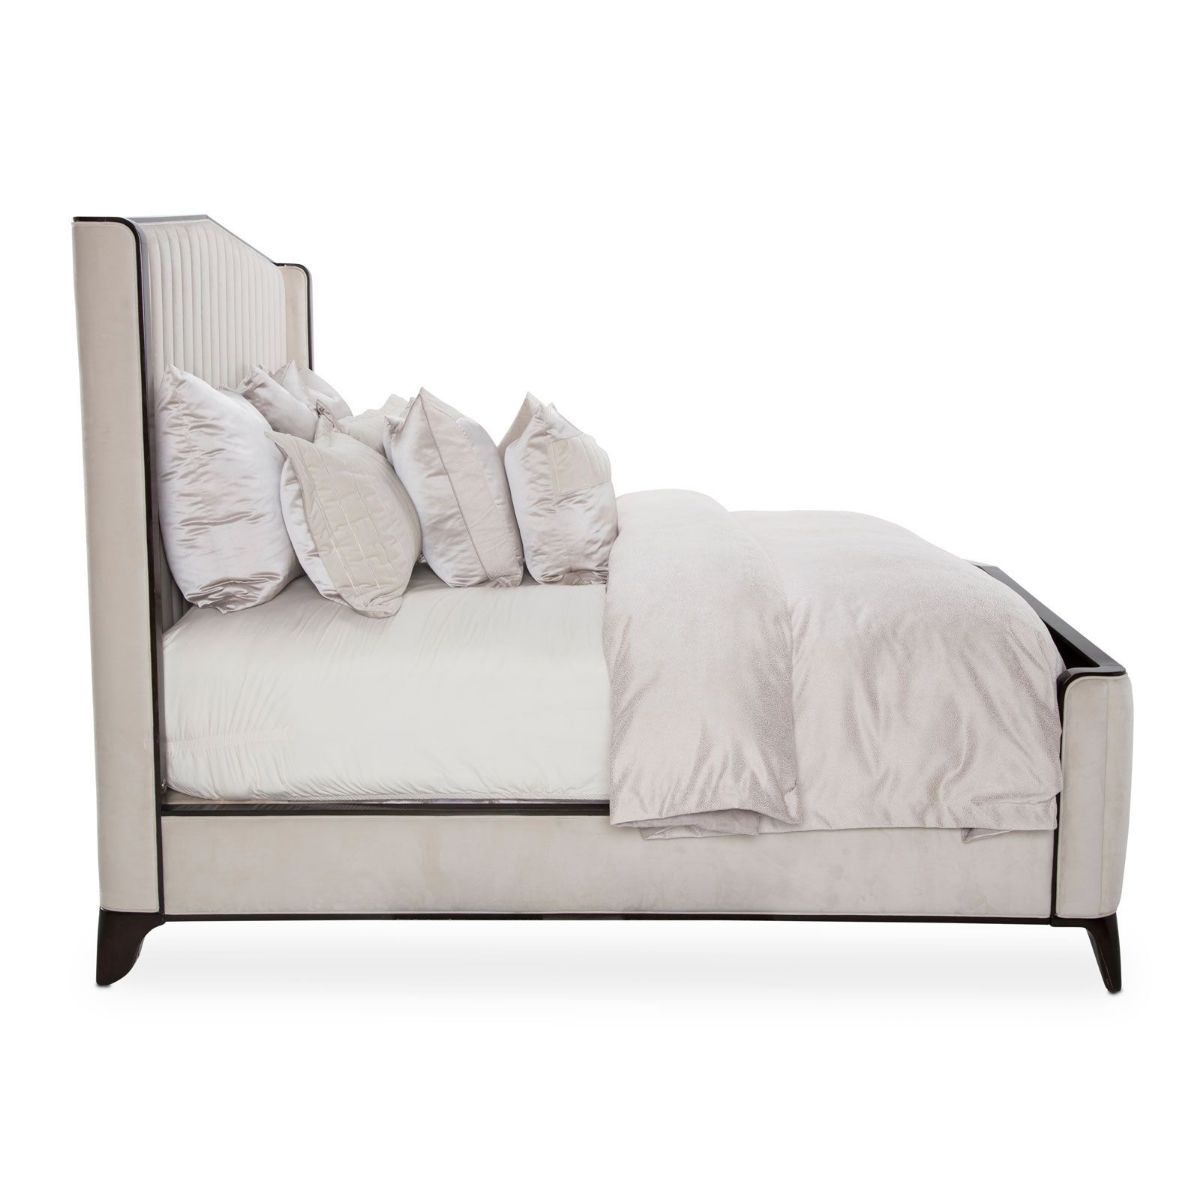 Picture of Paris Chic Upholstered Queen Bed